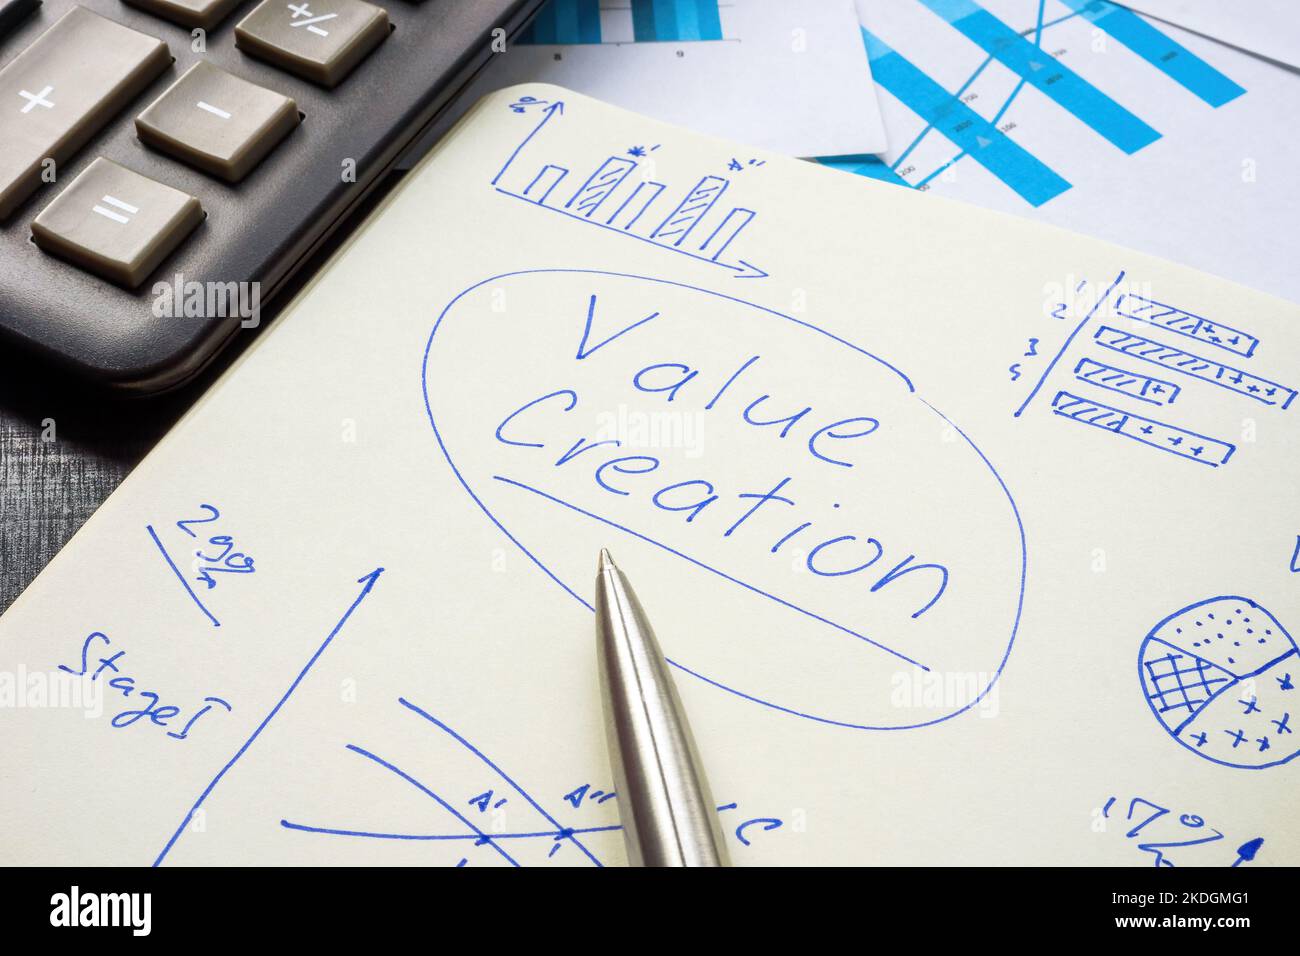 Open notepad with notes about value creation. Stock Photo